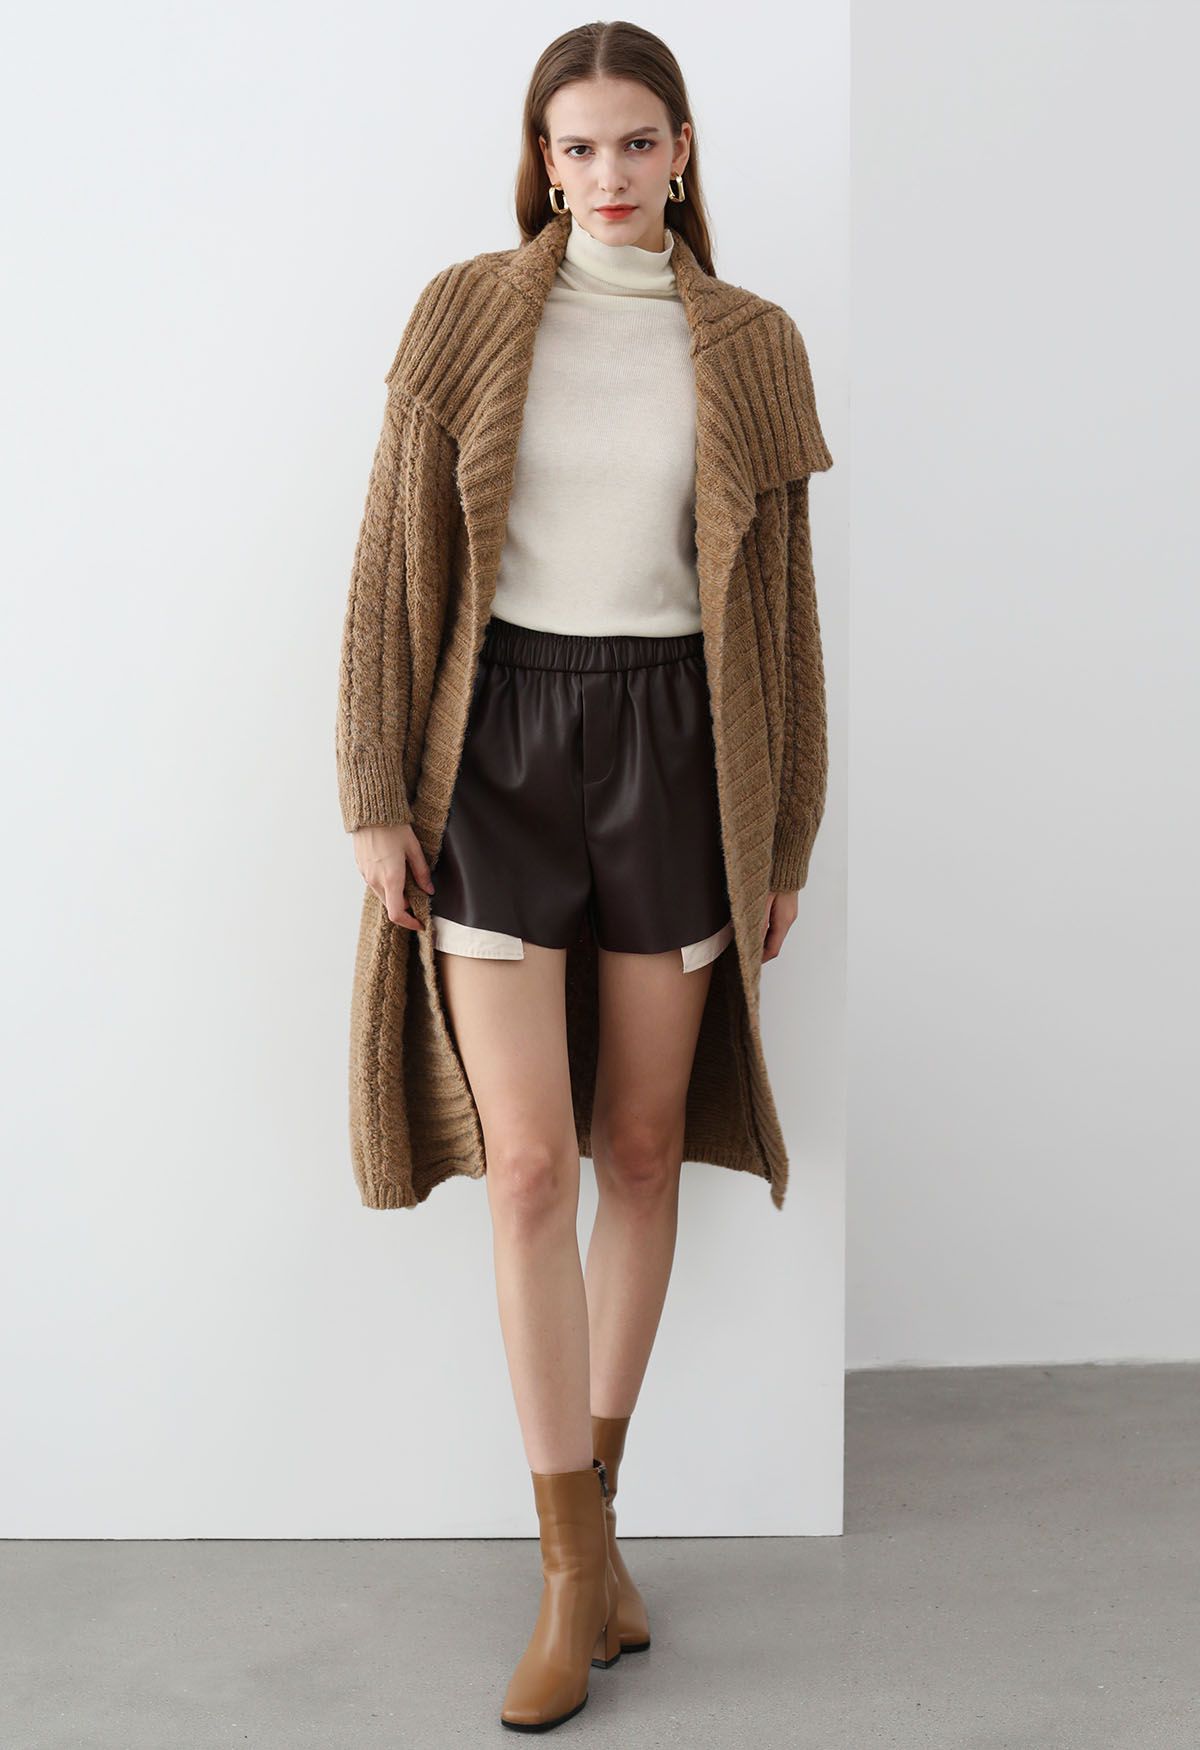 Flap Collar Cable Knit Longline Cardigan in Brown